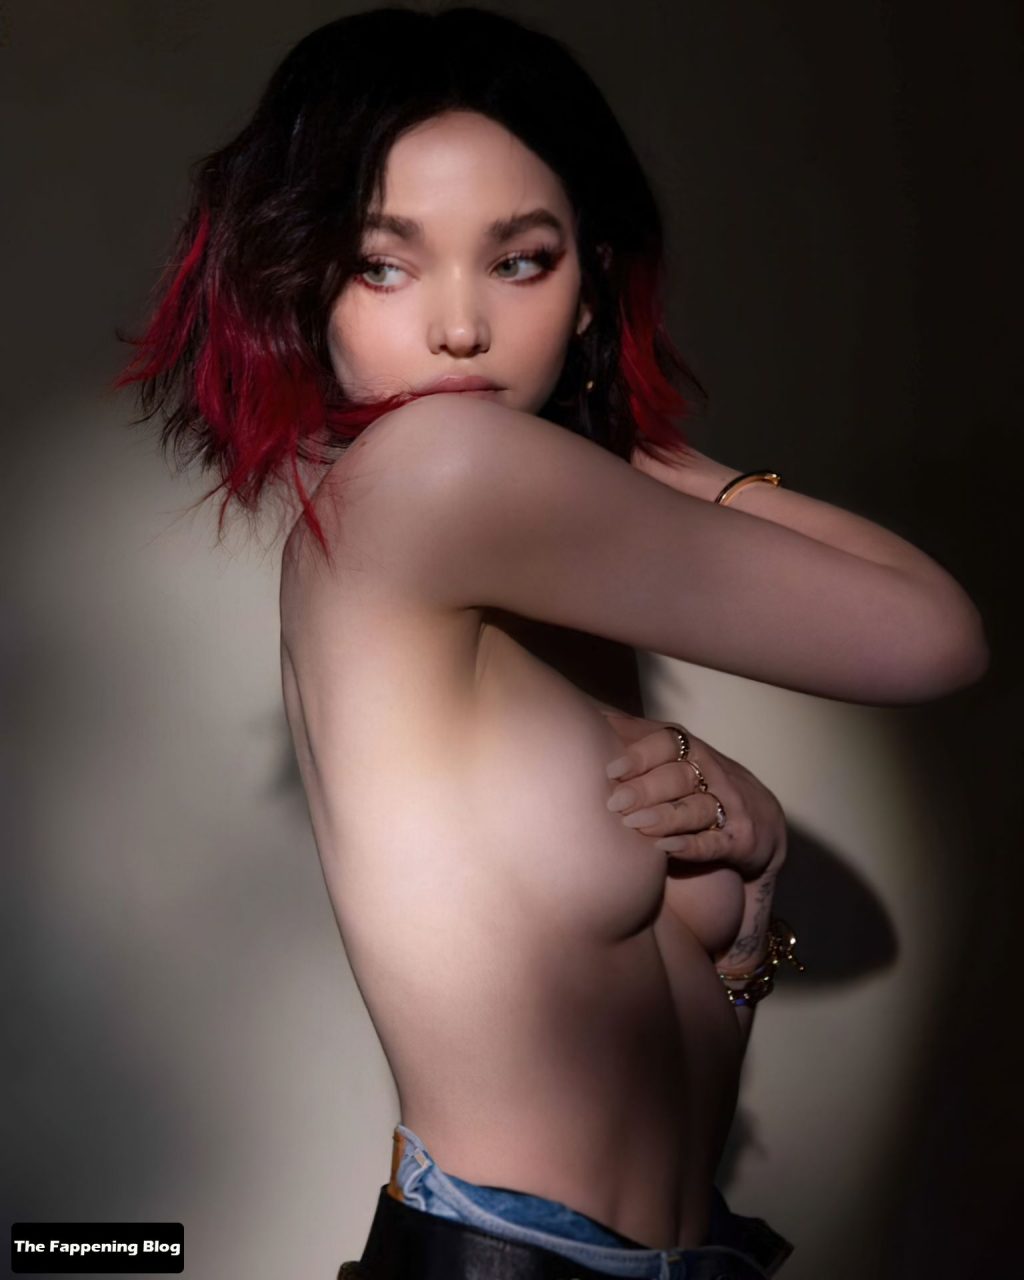 Dove Cameron Looks Hot in a Topless Shoot (5 Photos)